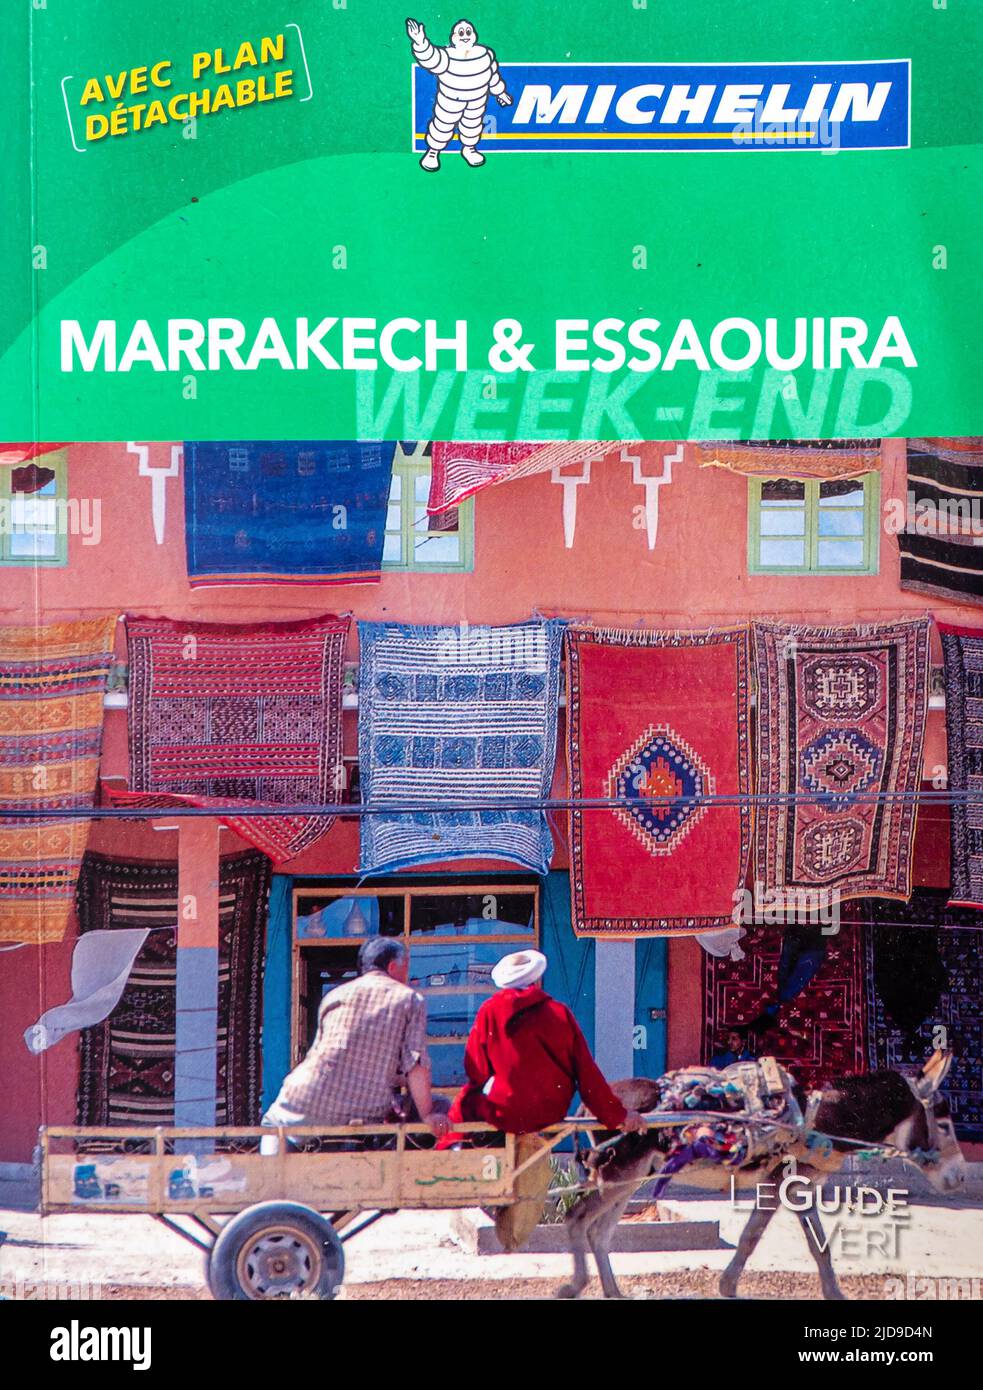 Michelin travel Green guide in French - Morocco, Marrakech and Essaouira - cover Stock Photo